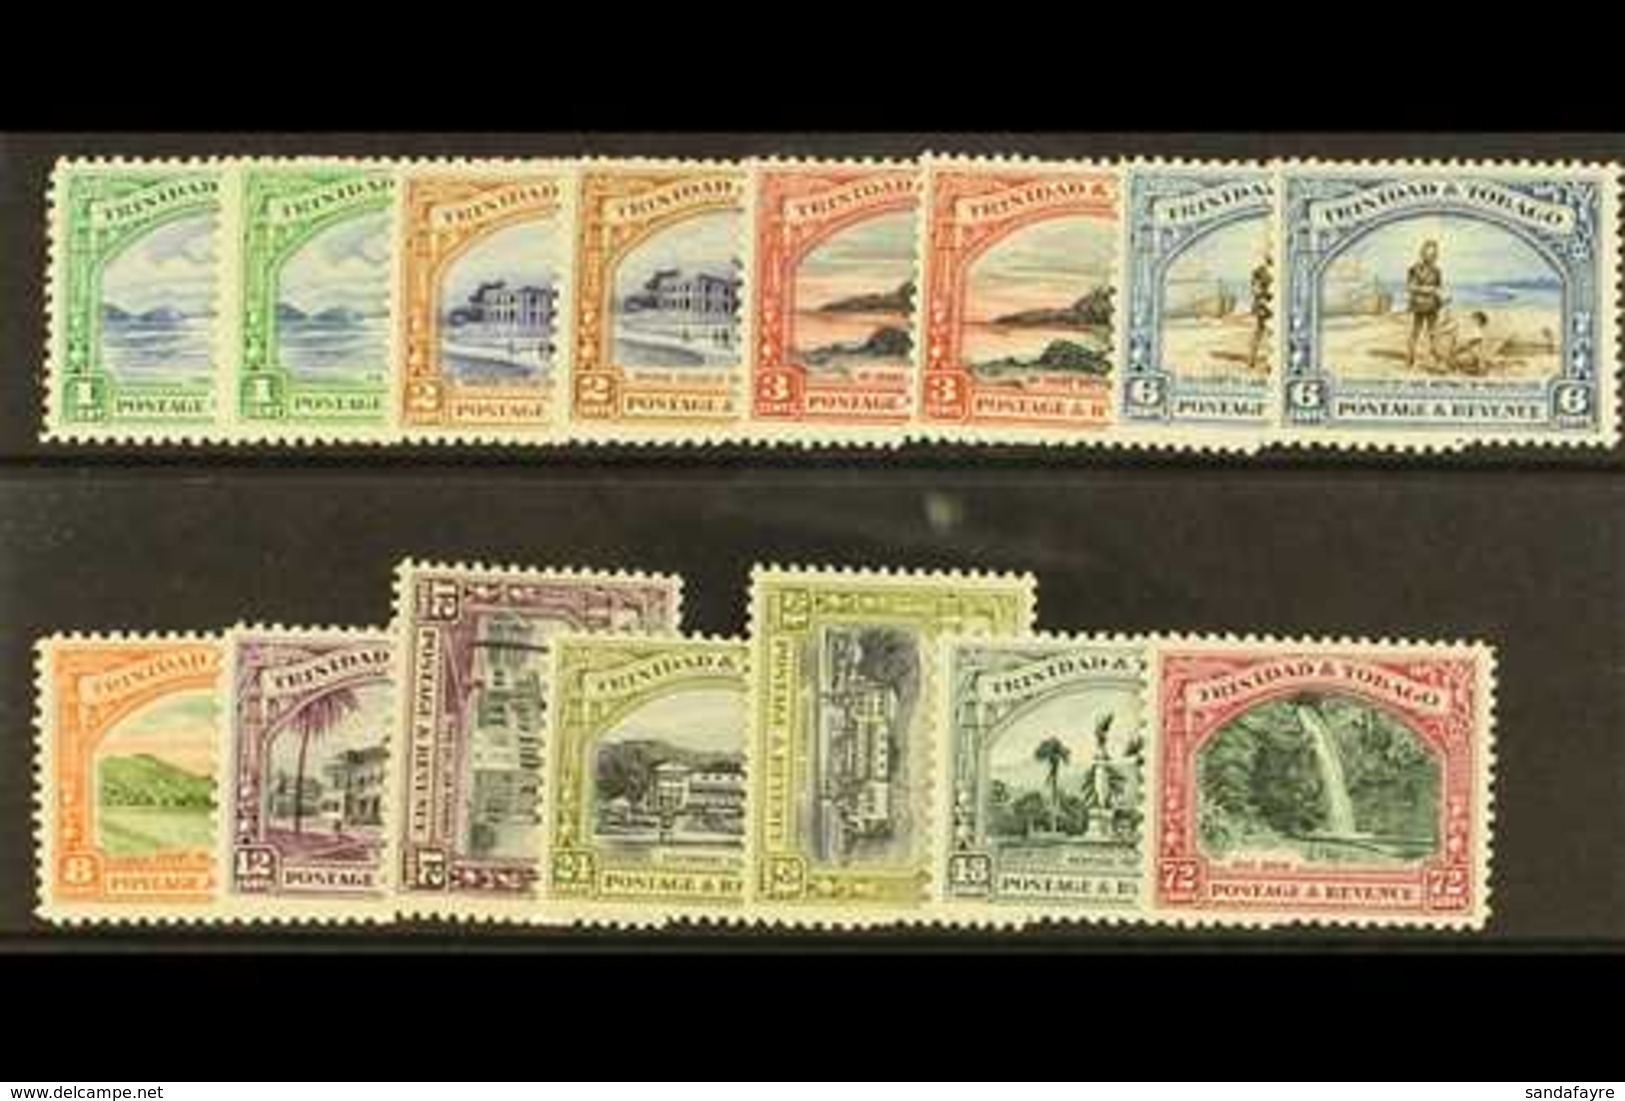 1935-37 Pictorial Set, SG 230/238, Plus Perf. 12½ Set, All But The Latter 12c And 24c Are Never Hinged Mint. (15 Stamps) - Trinité & Tobago (...-1961)